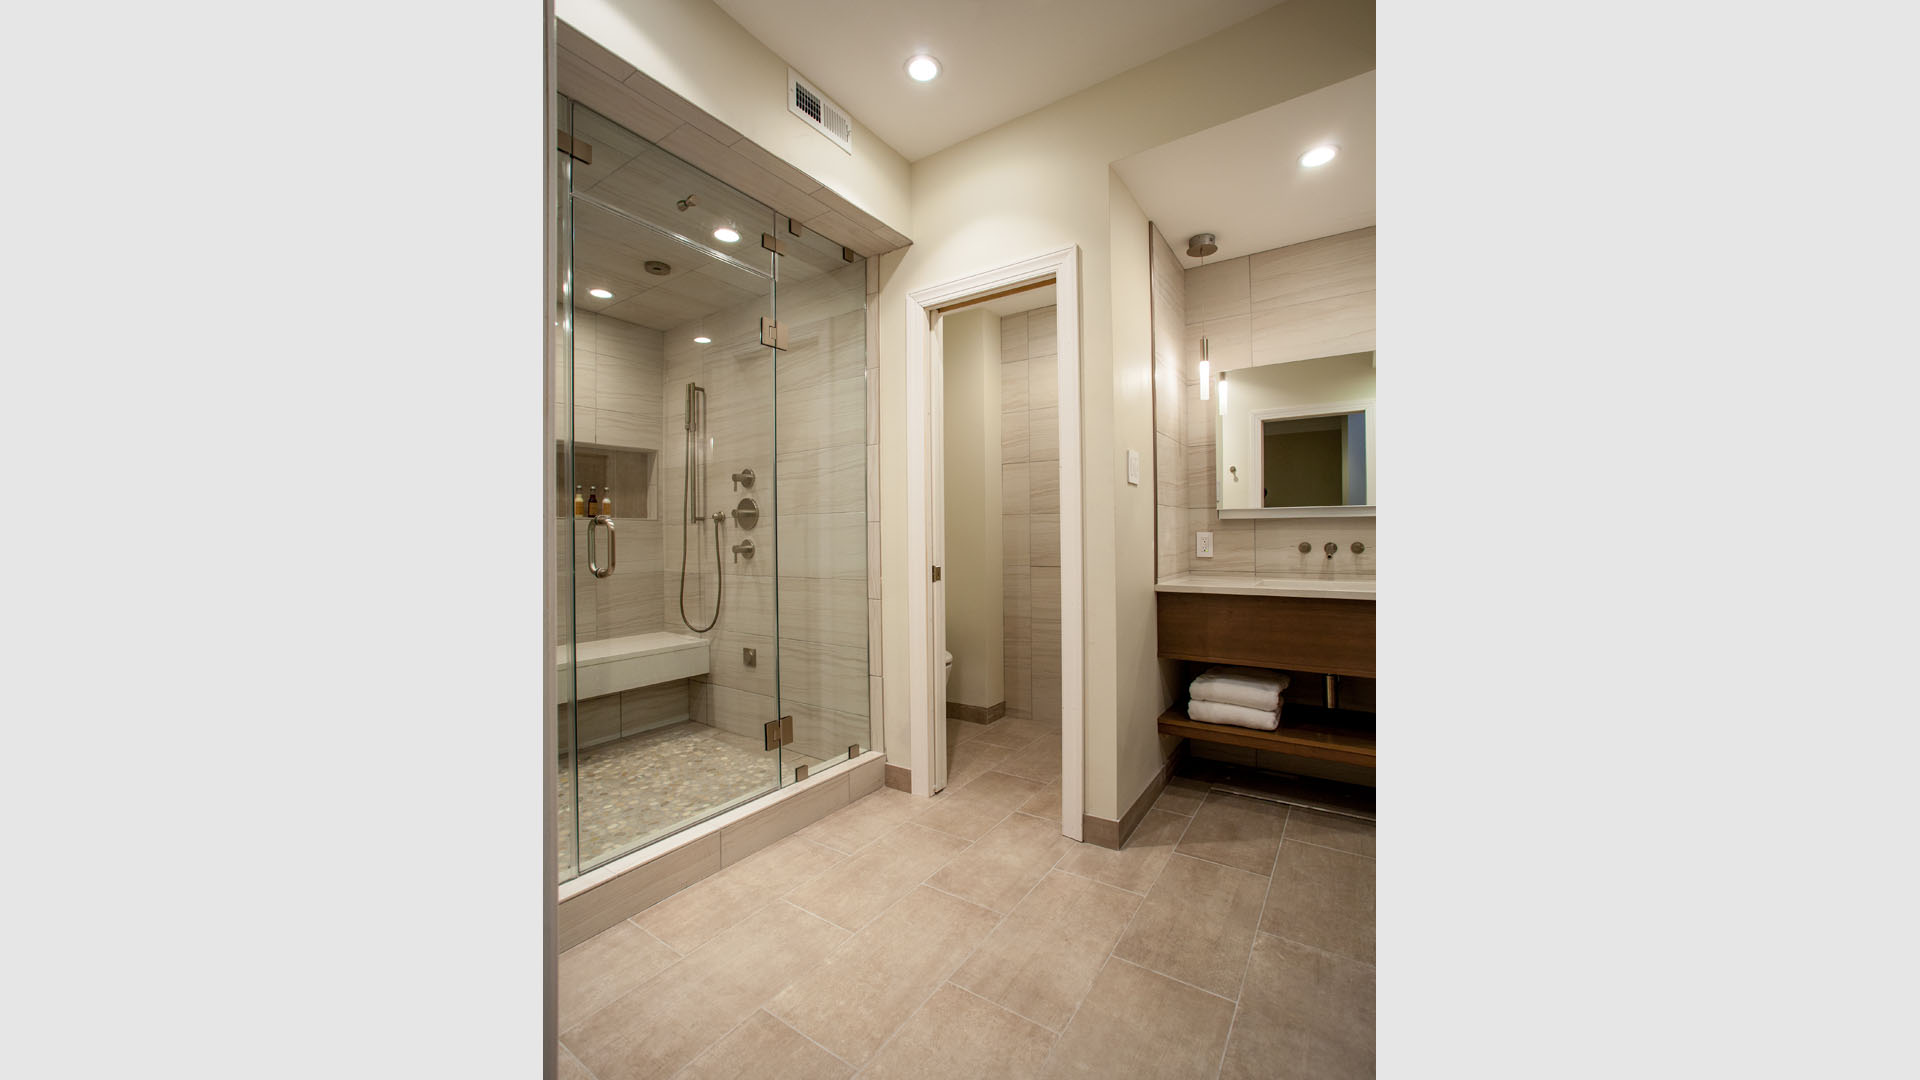 2014 NAHB Best Of American Living Awards (BALA)  Silver Award Winner, Entire Whole Remodel up to $250,000